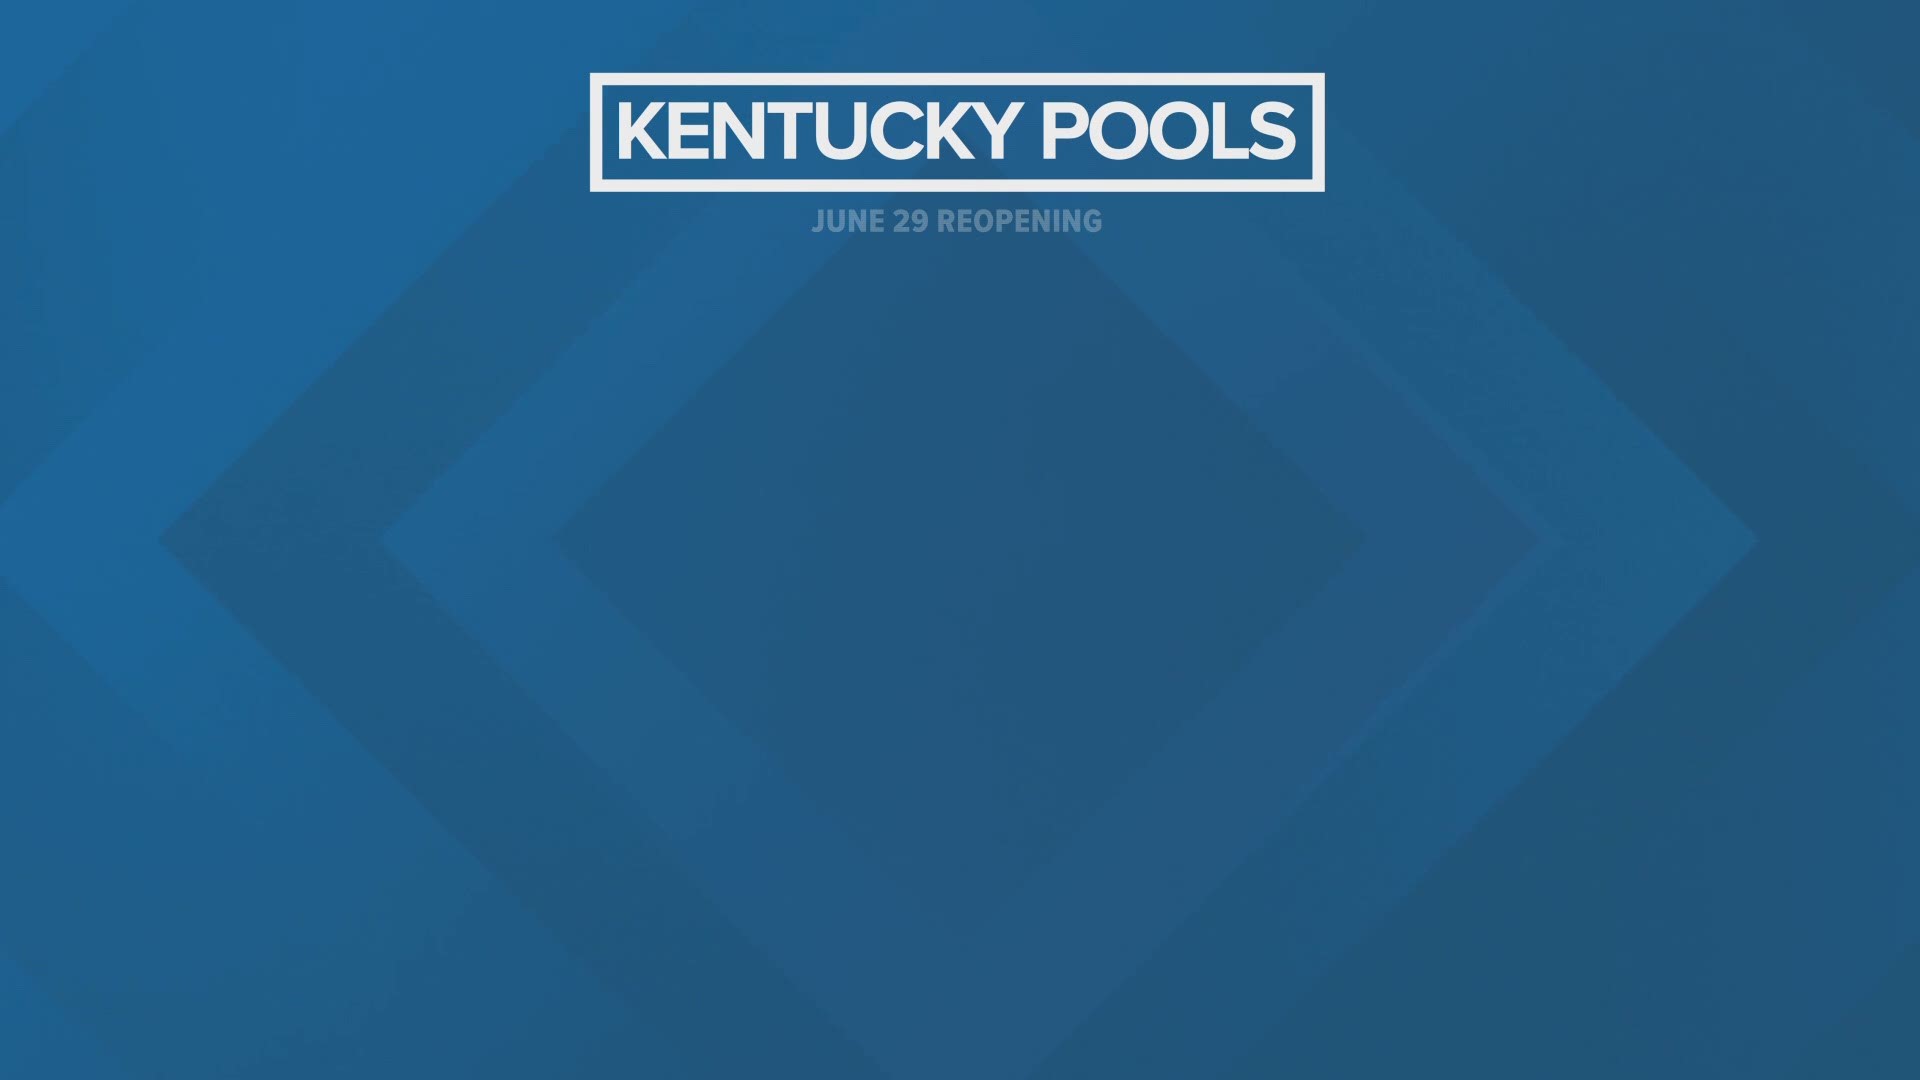 Here are a few bullet points of the requirements needed to reopen Kentucky pools on June 29.